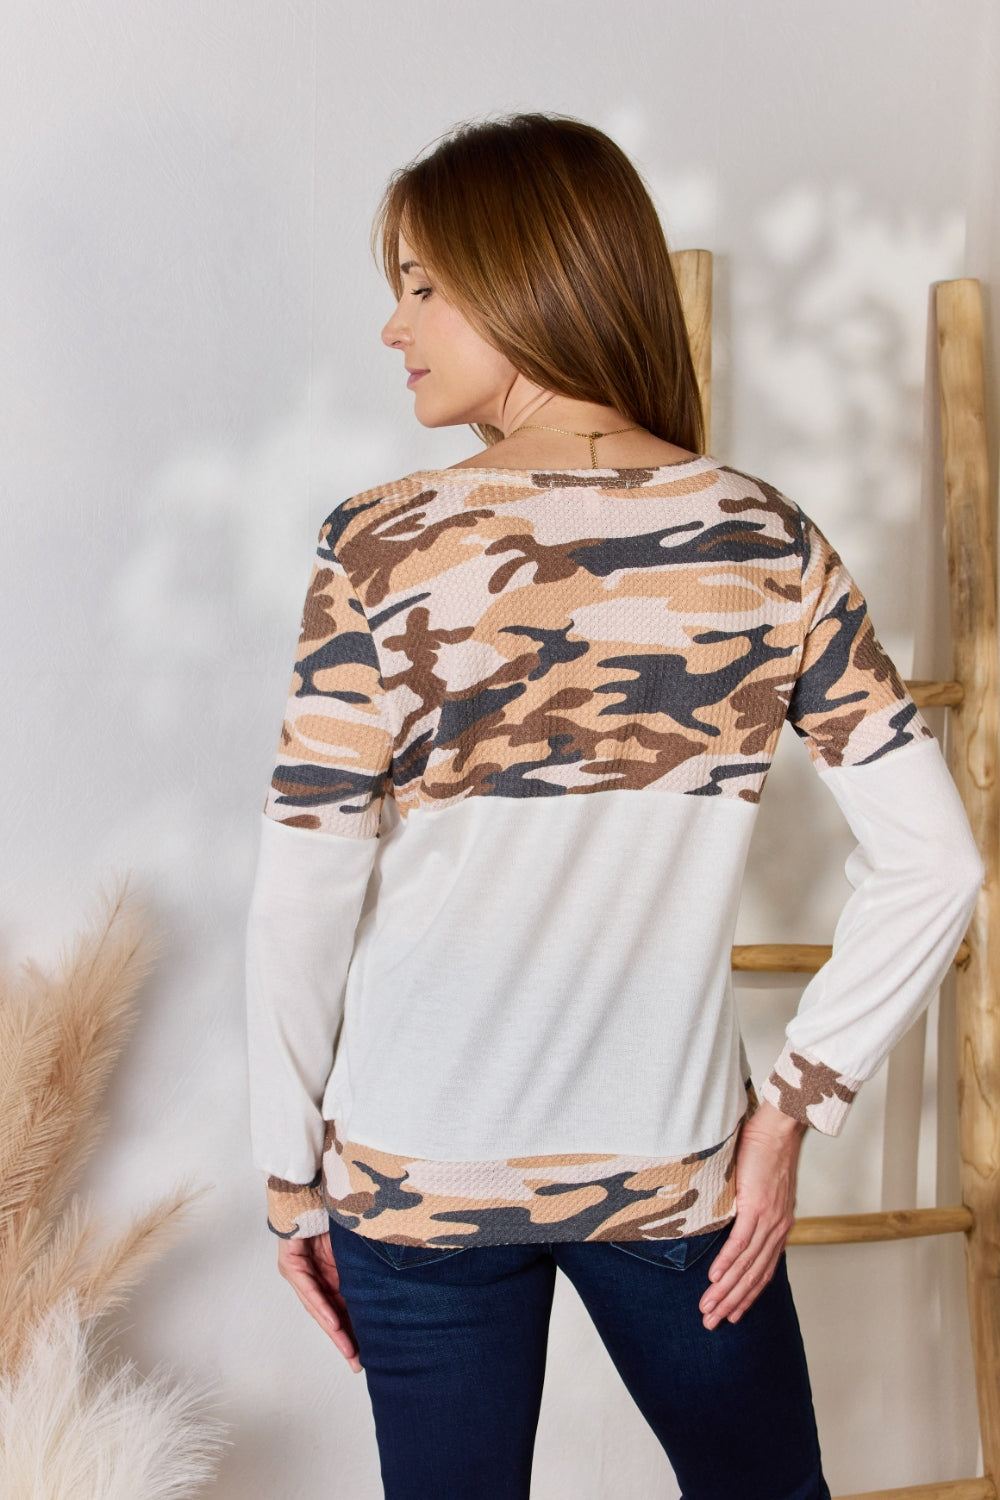 Womens Waffle Knit Print Top - Camo Print - Inspired Eye Boutique